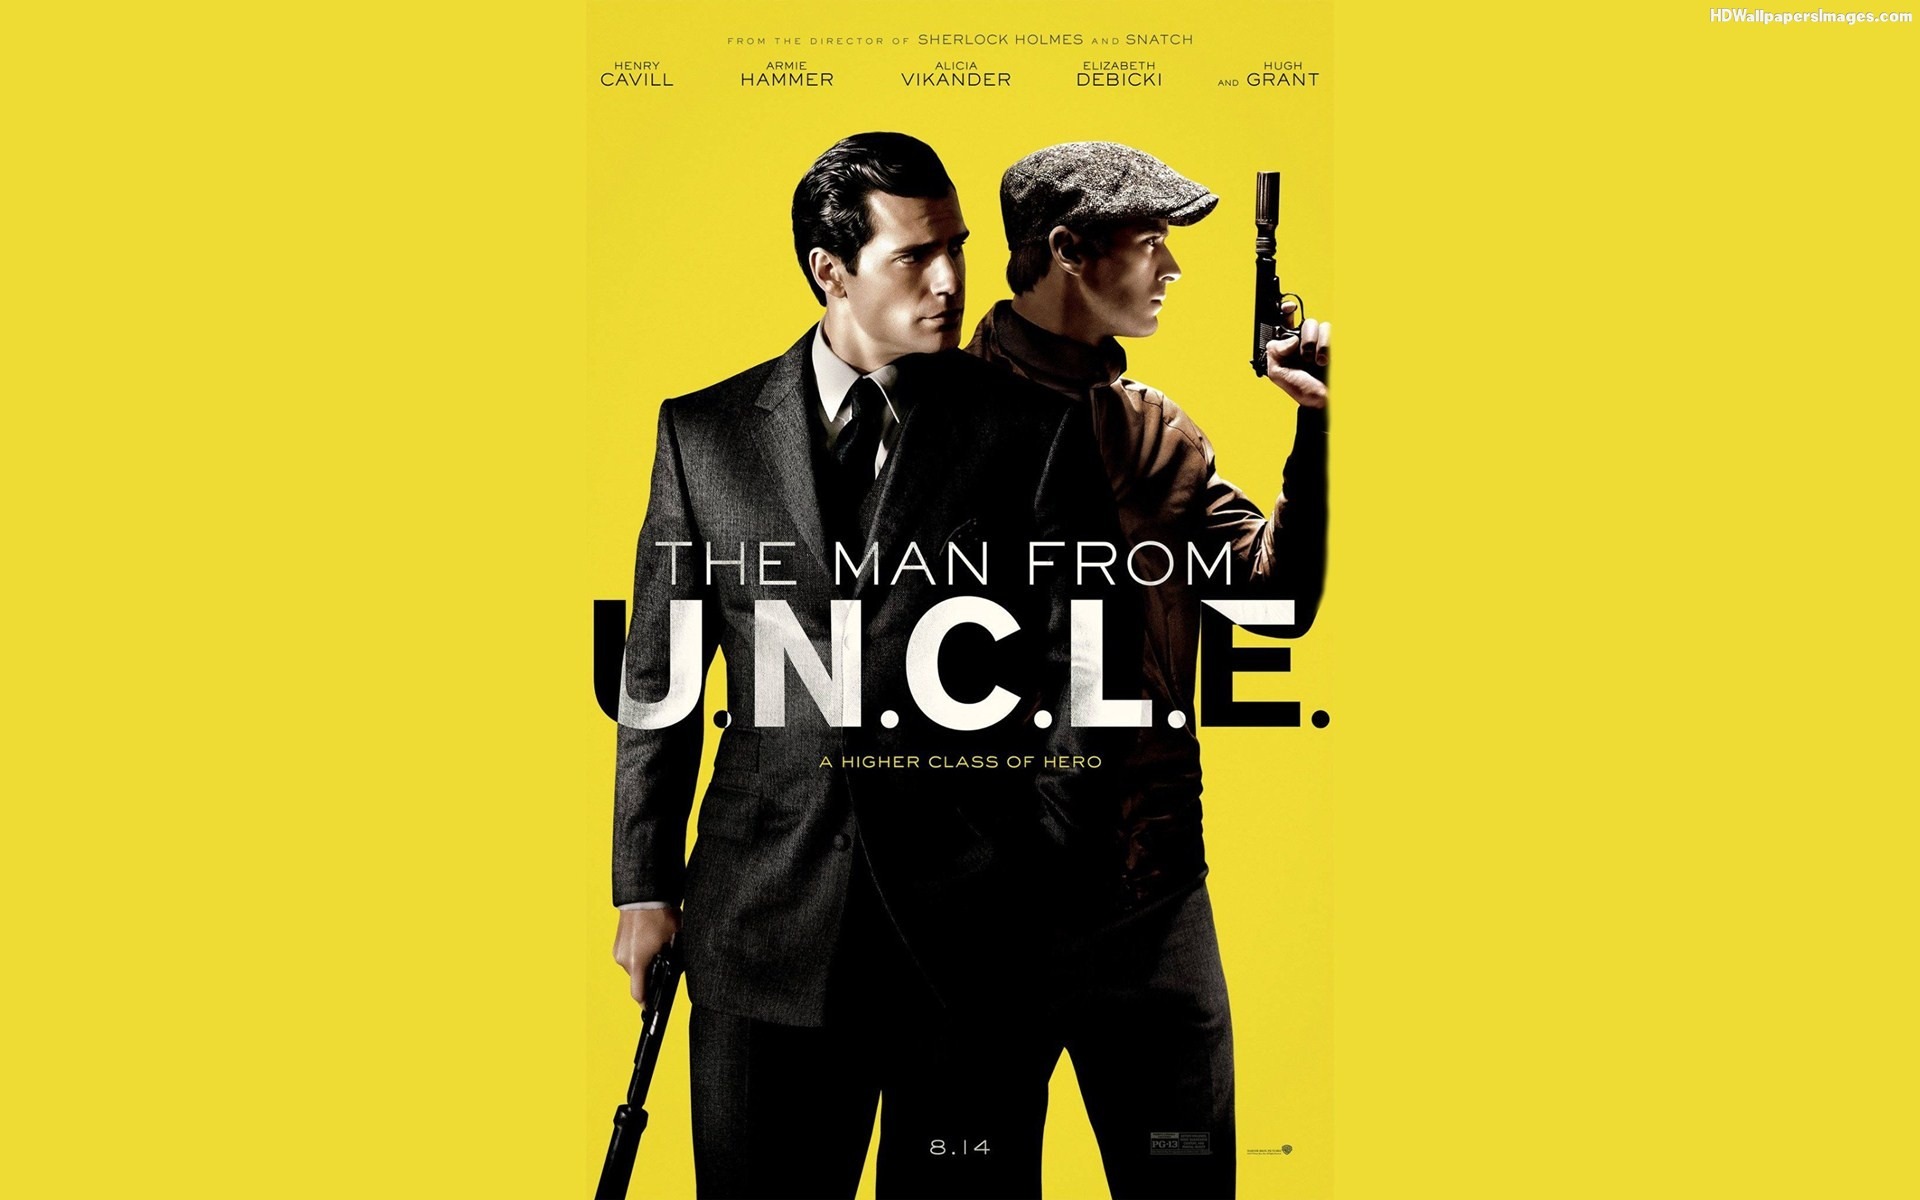 The Man From U.N.C.L.E.  Movie Review